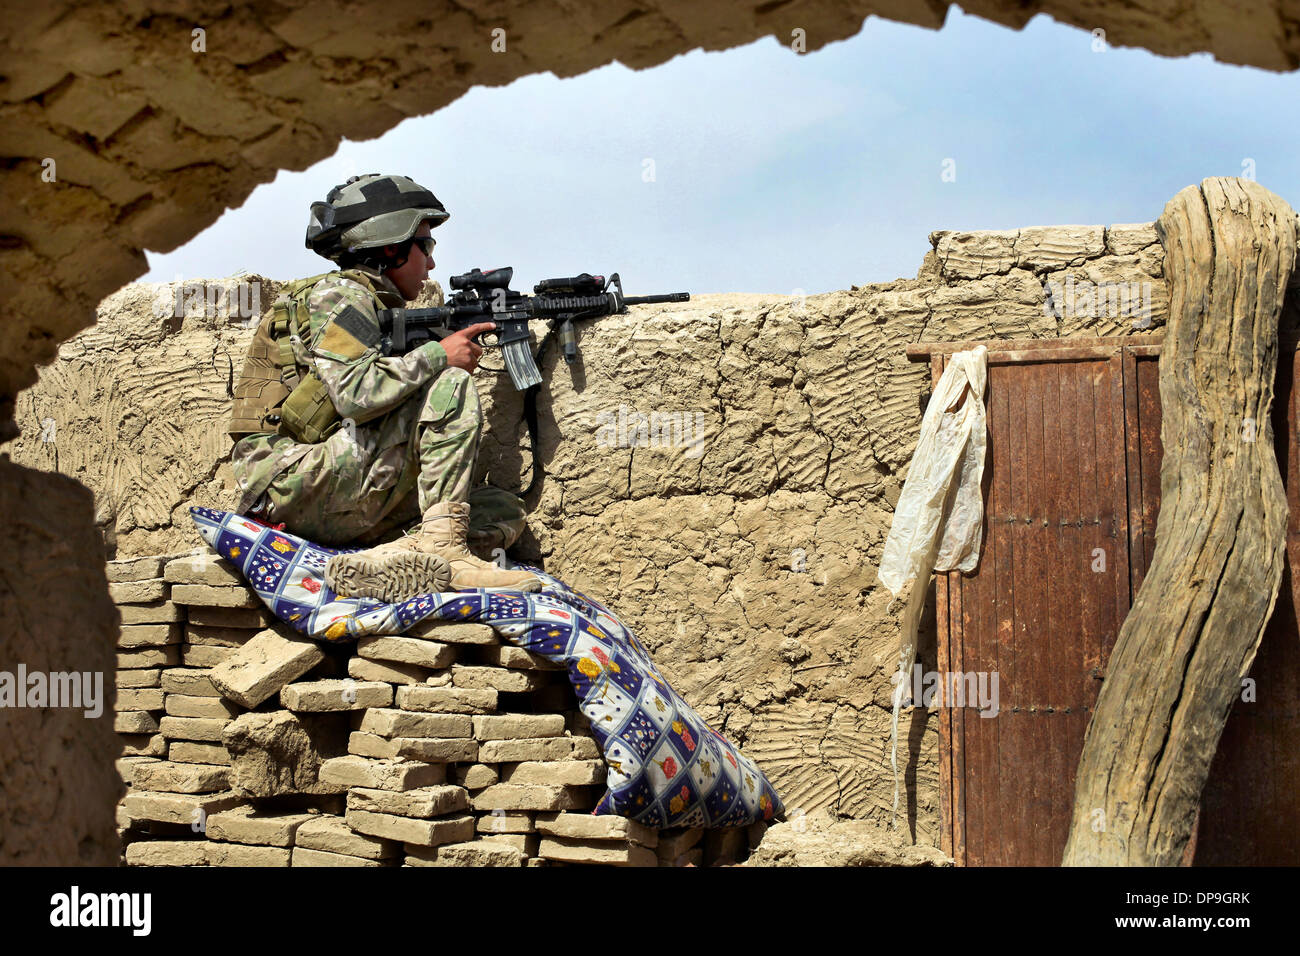 Member of an Afghan-international security force secures the area while in pursuit of militants, Kandahar District, Afghanistan Stock Photo